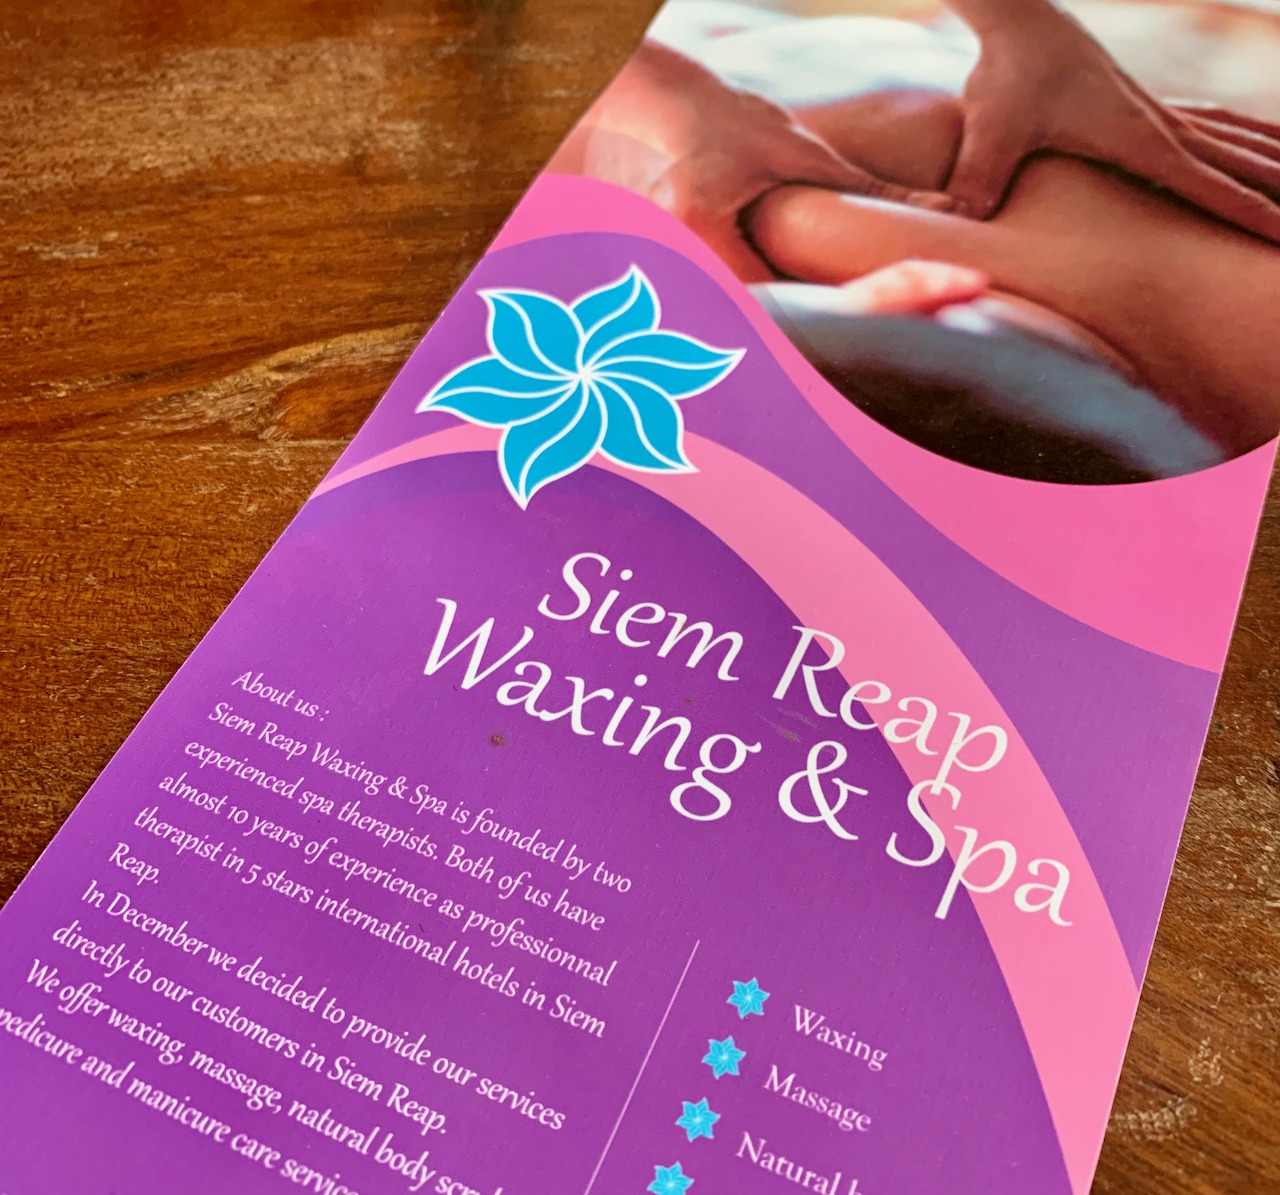 Siem Reap Waxing and Spa Sustainable Tourism